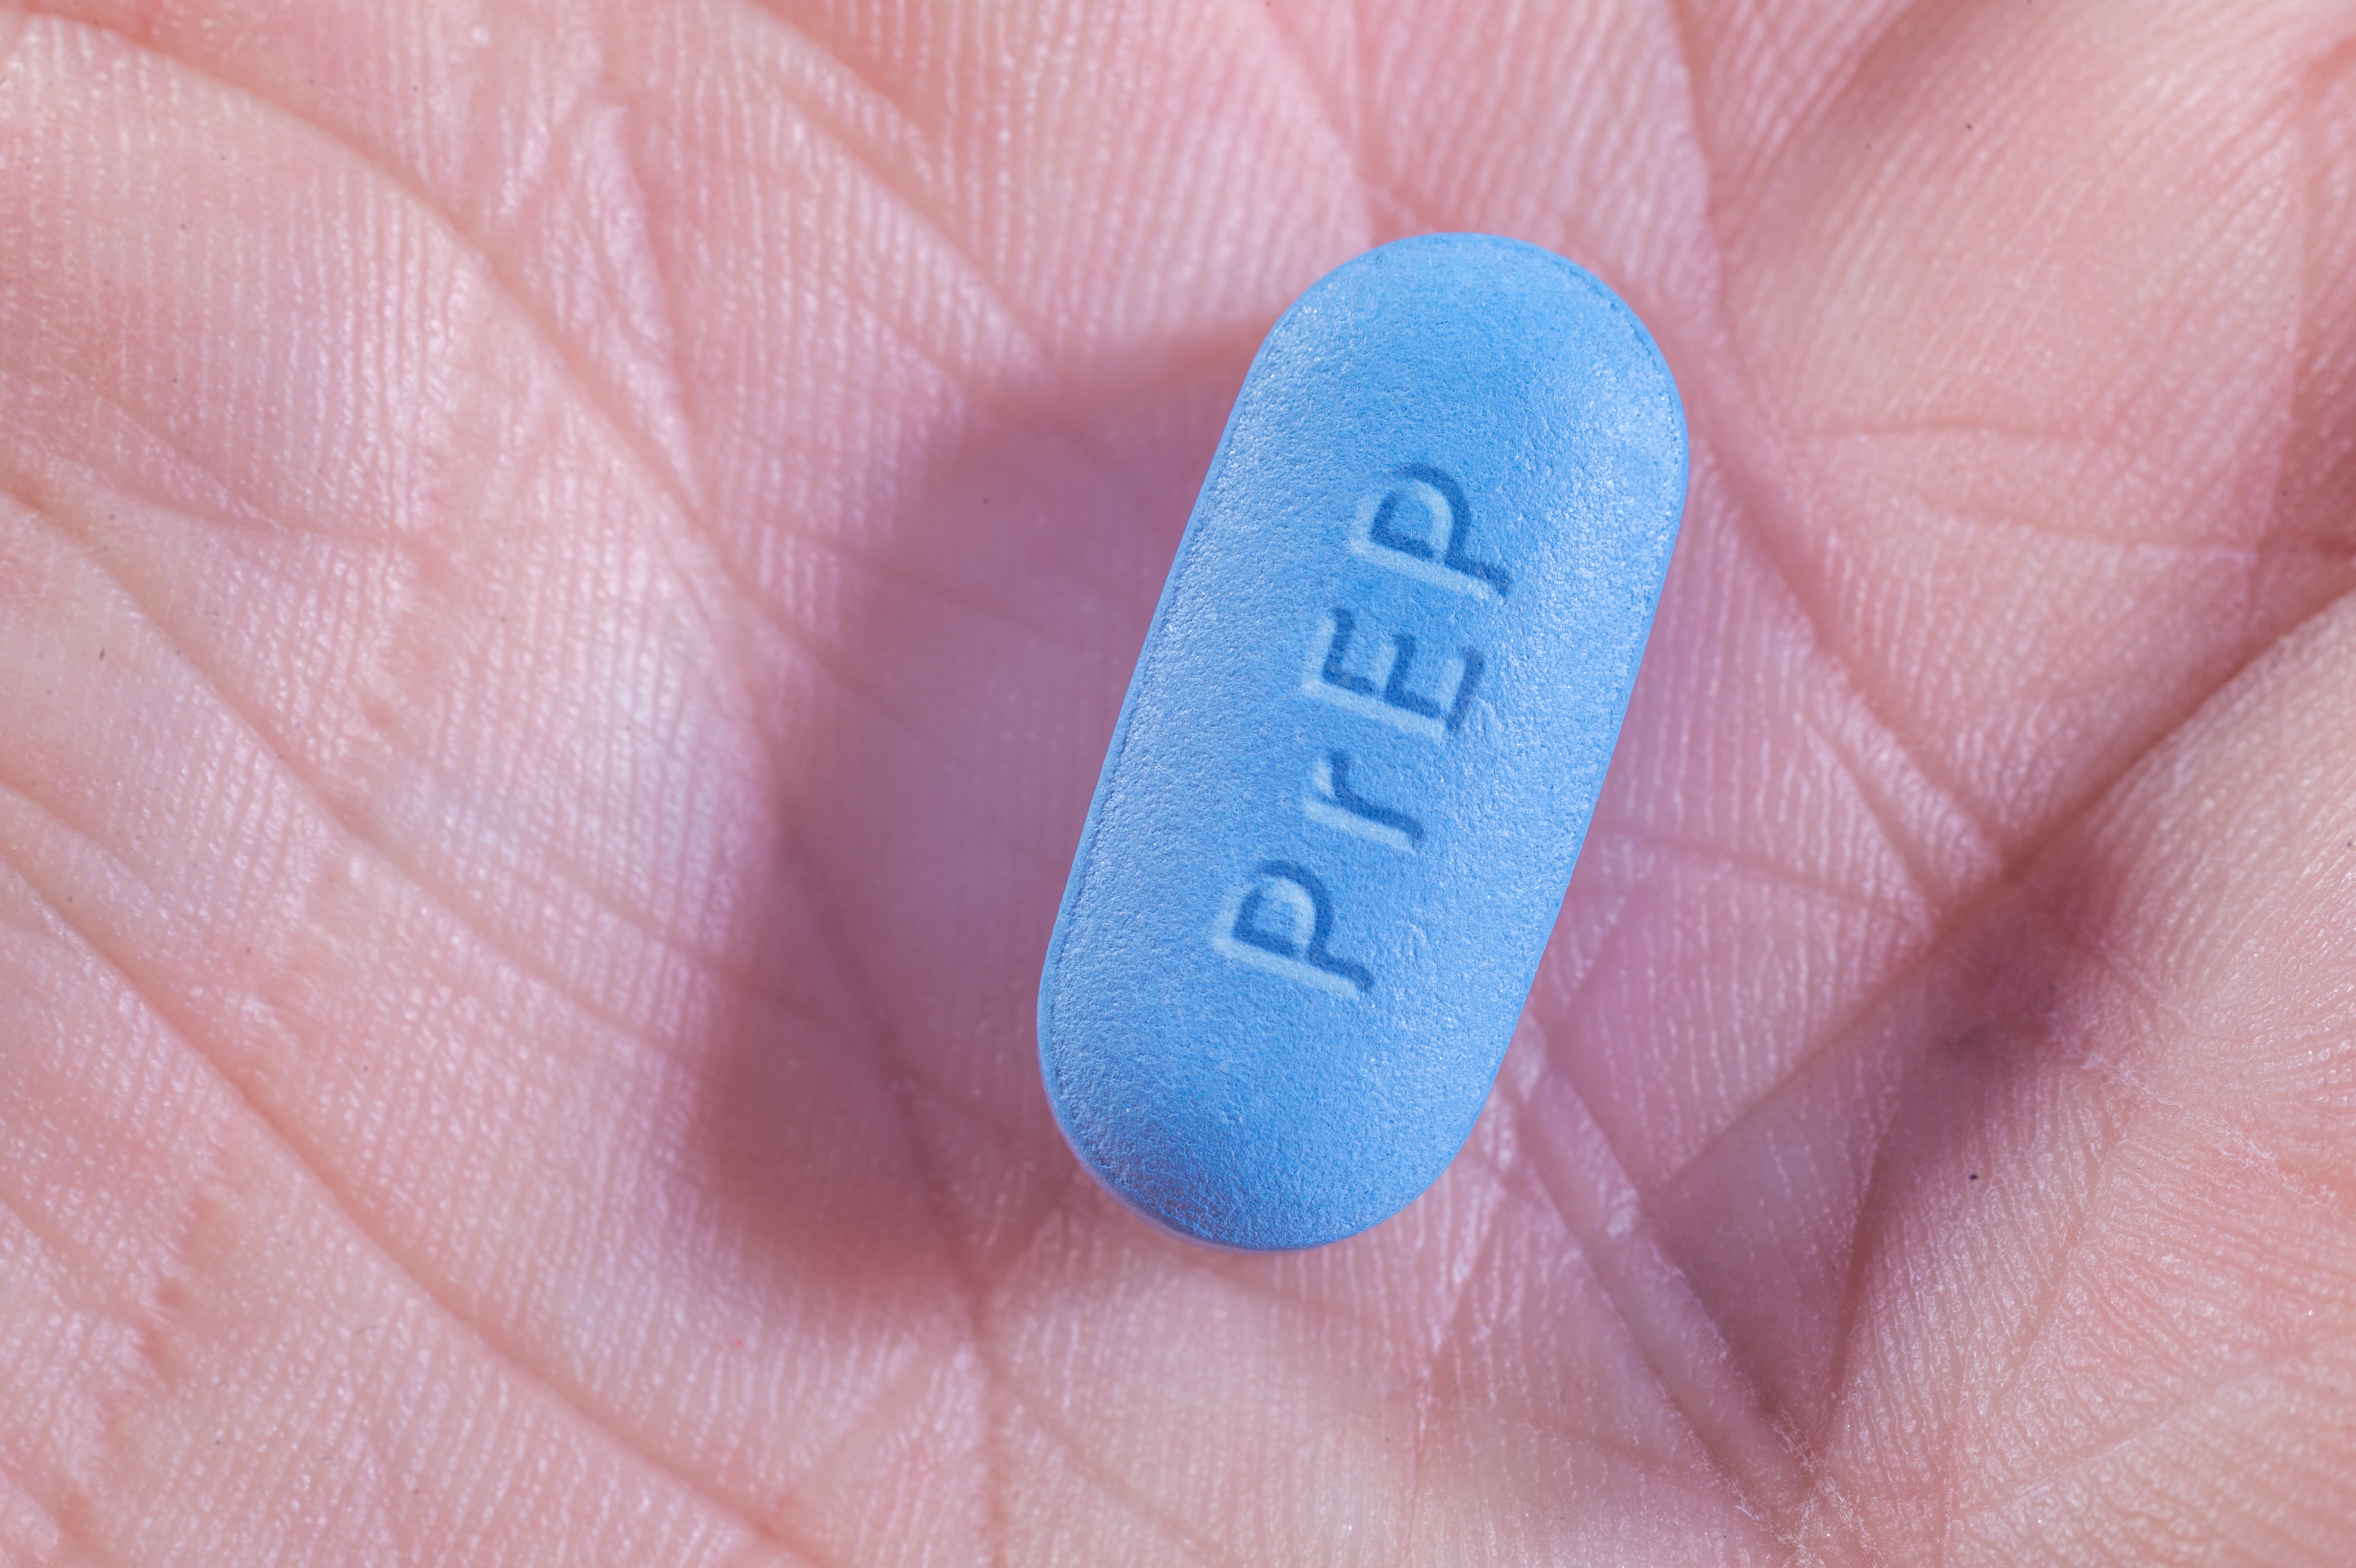 A second person taking daily PrEP has become HIV-positive